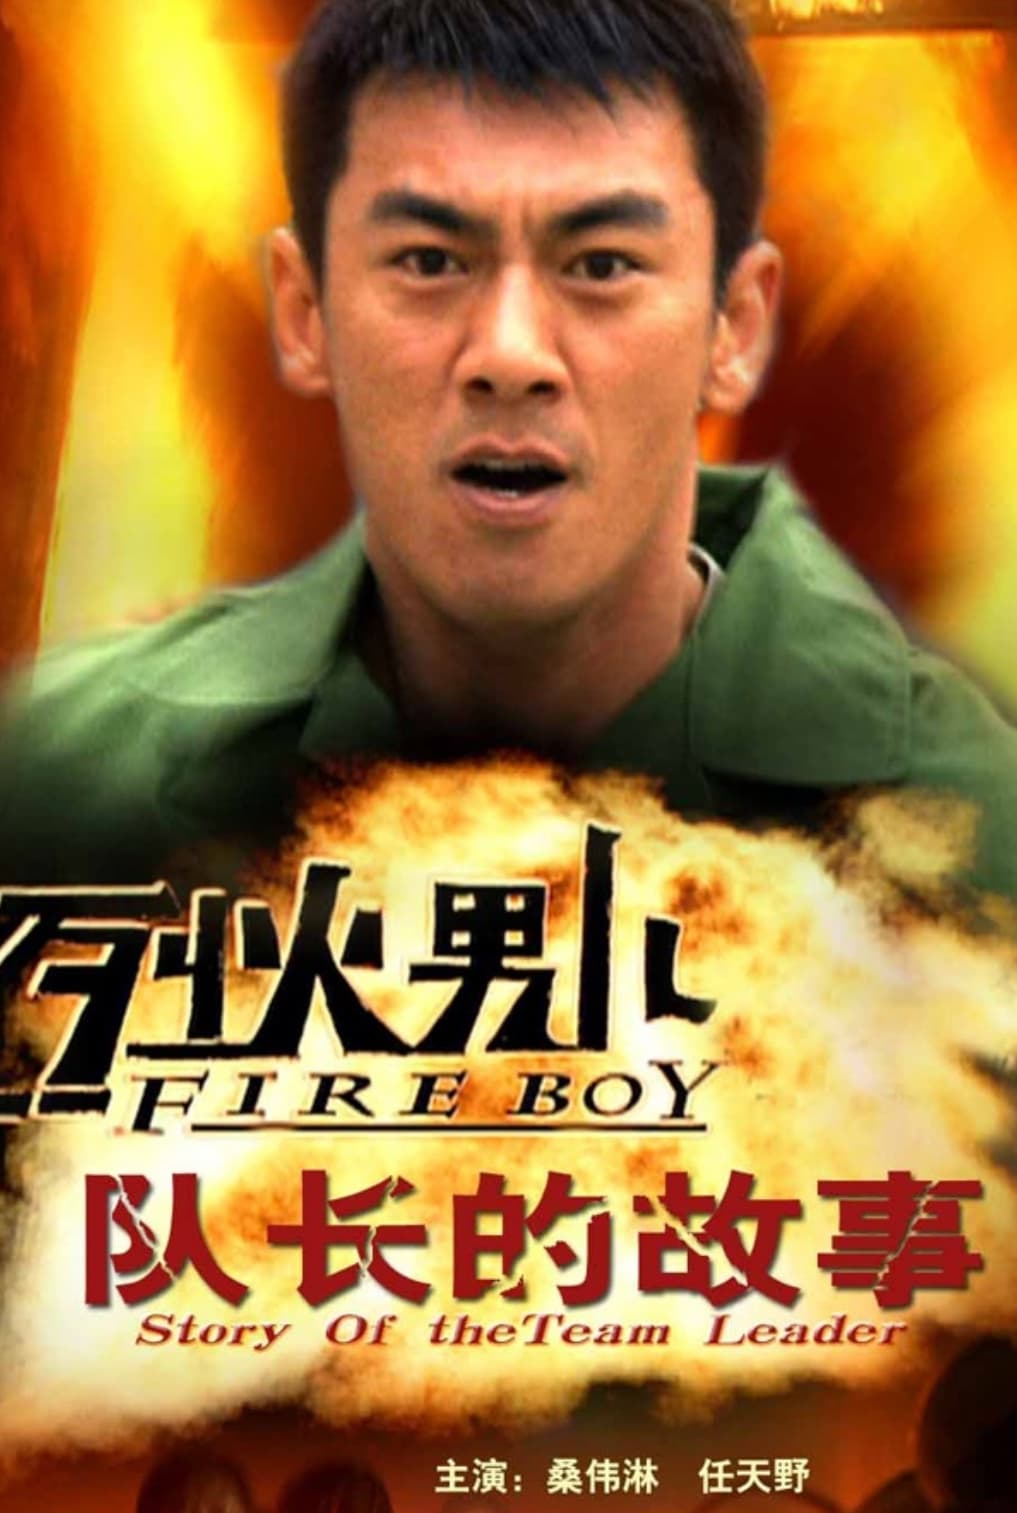 Fire Boy: Story of The Team Leader